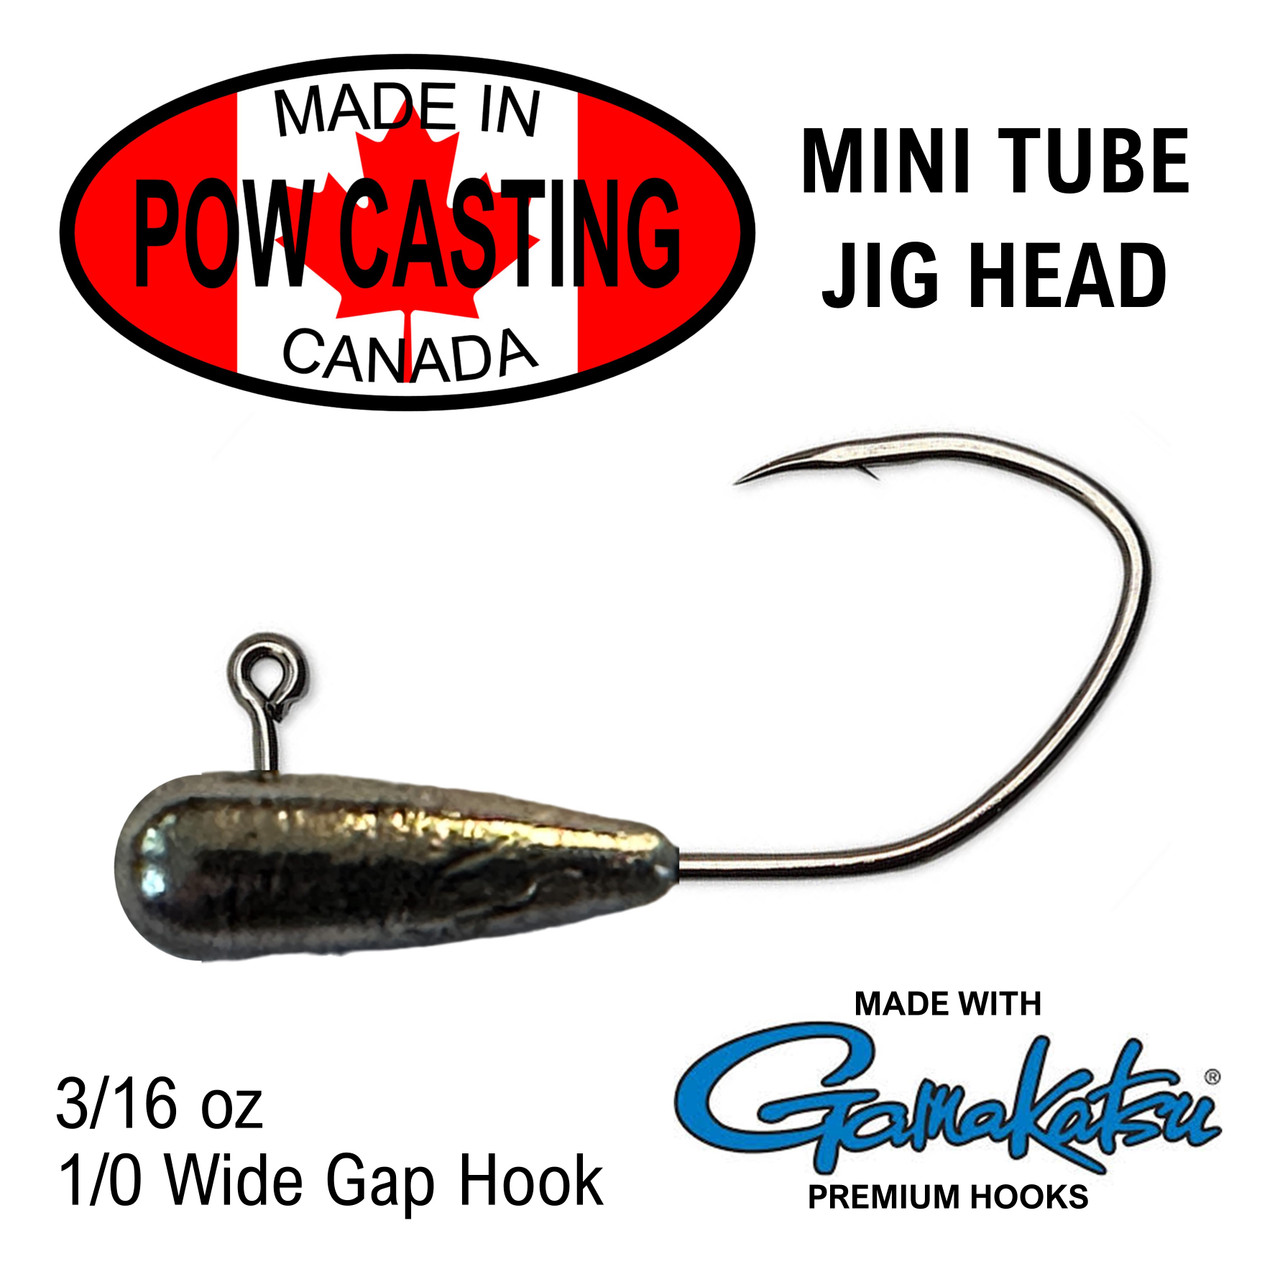 3/16 oz Tapered tube jig heads for standard mini 1.75" to 2.75" tubes